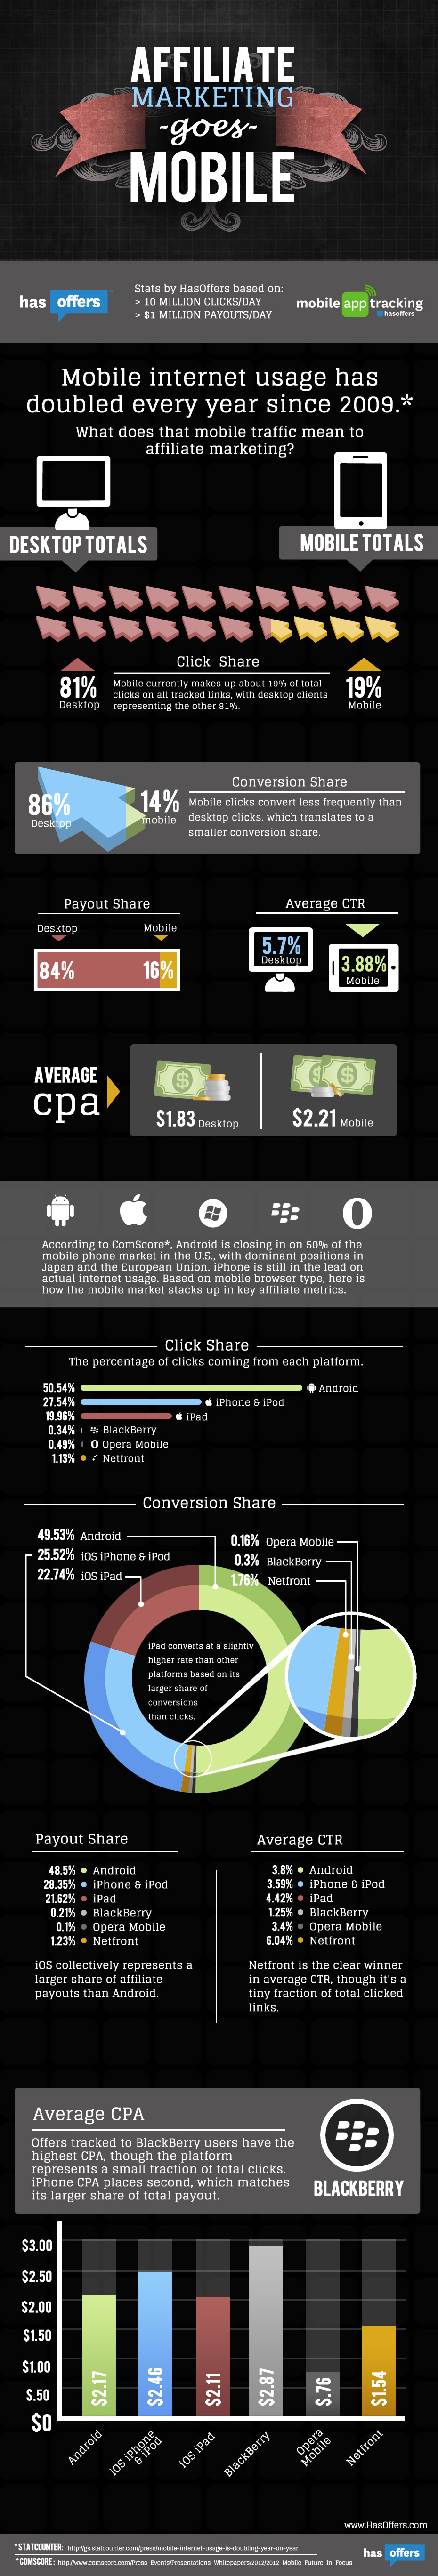 Infographic showing how Affiliate Marketing goes Mobile